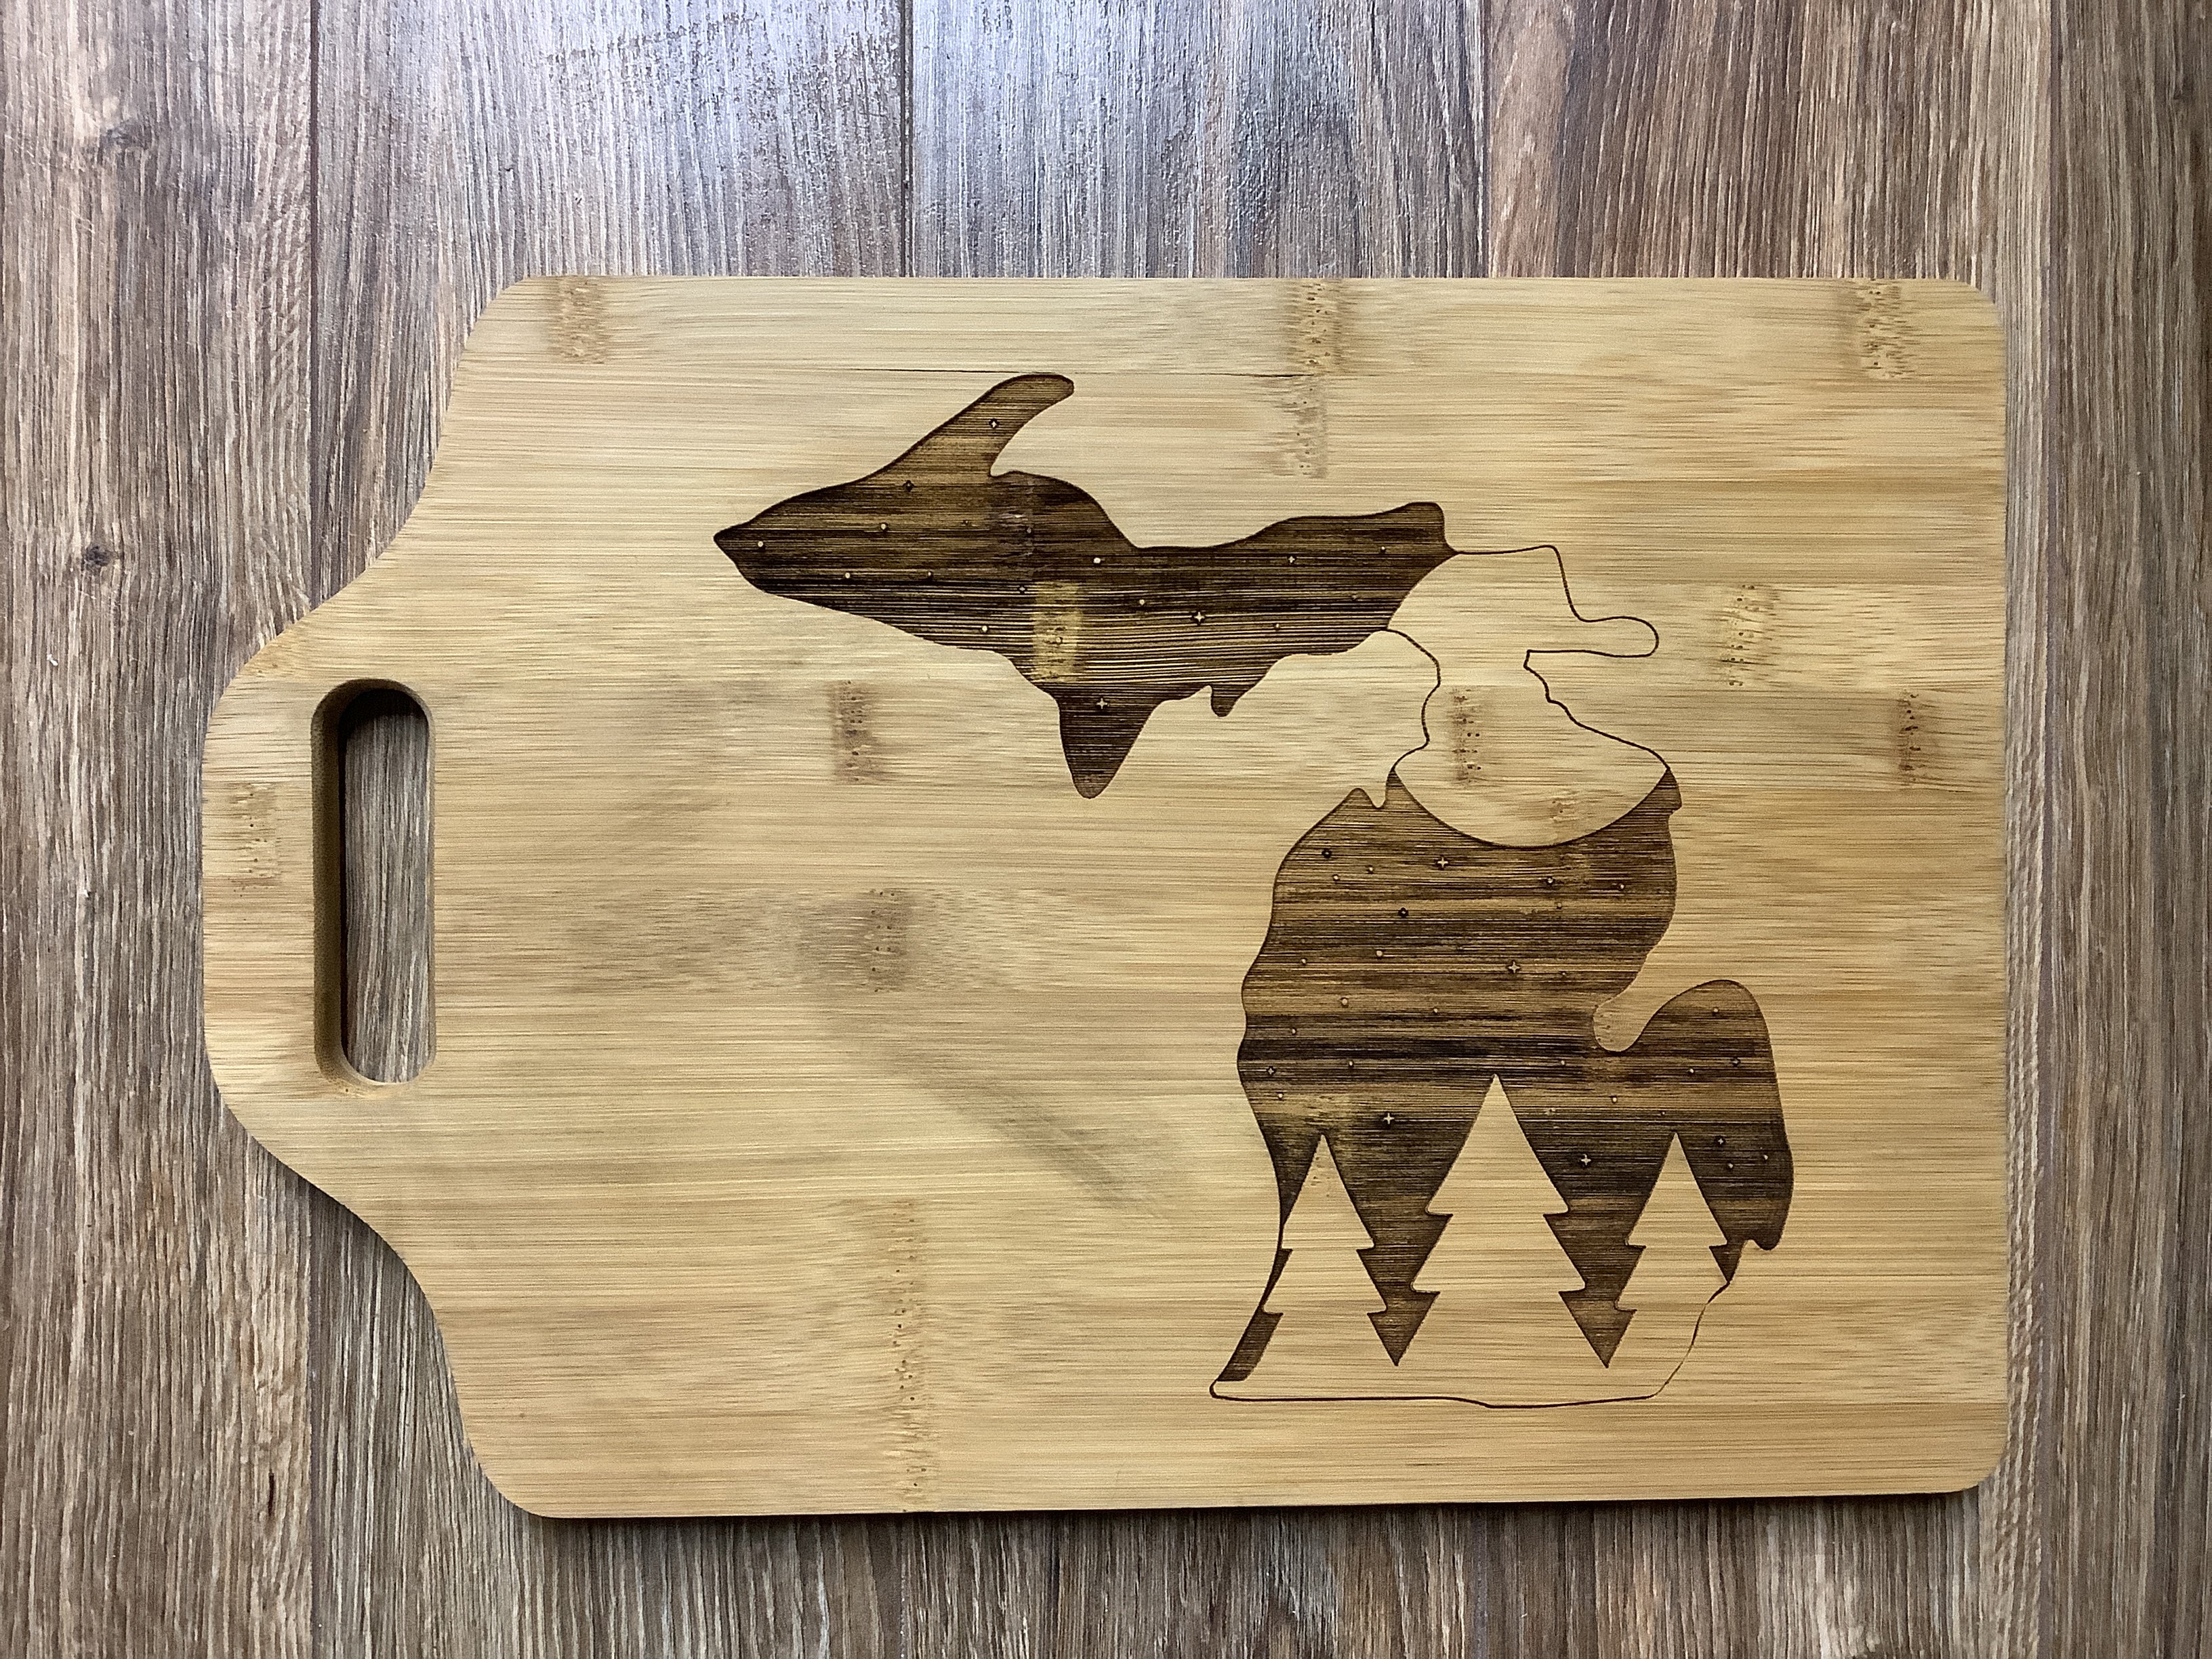 Starry Night - Michigan - Wooden Engraved - Cutting Board